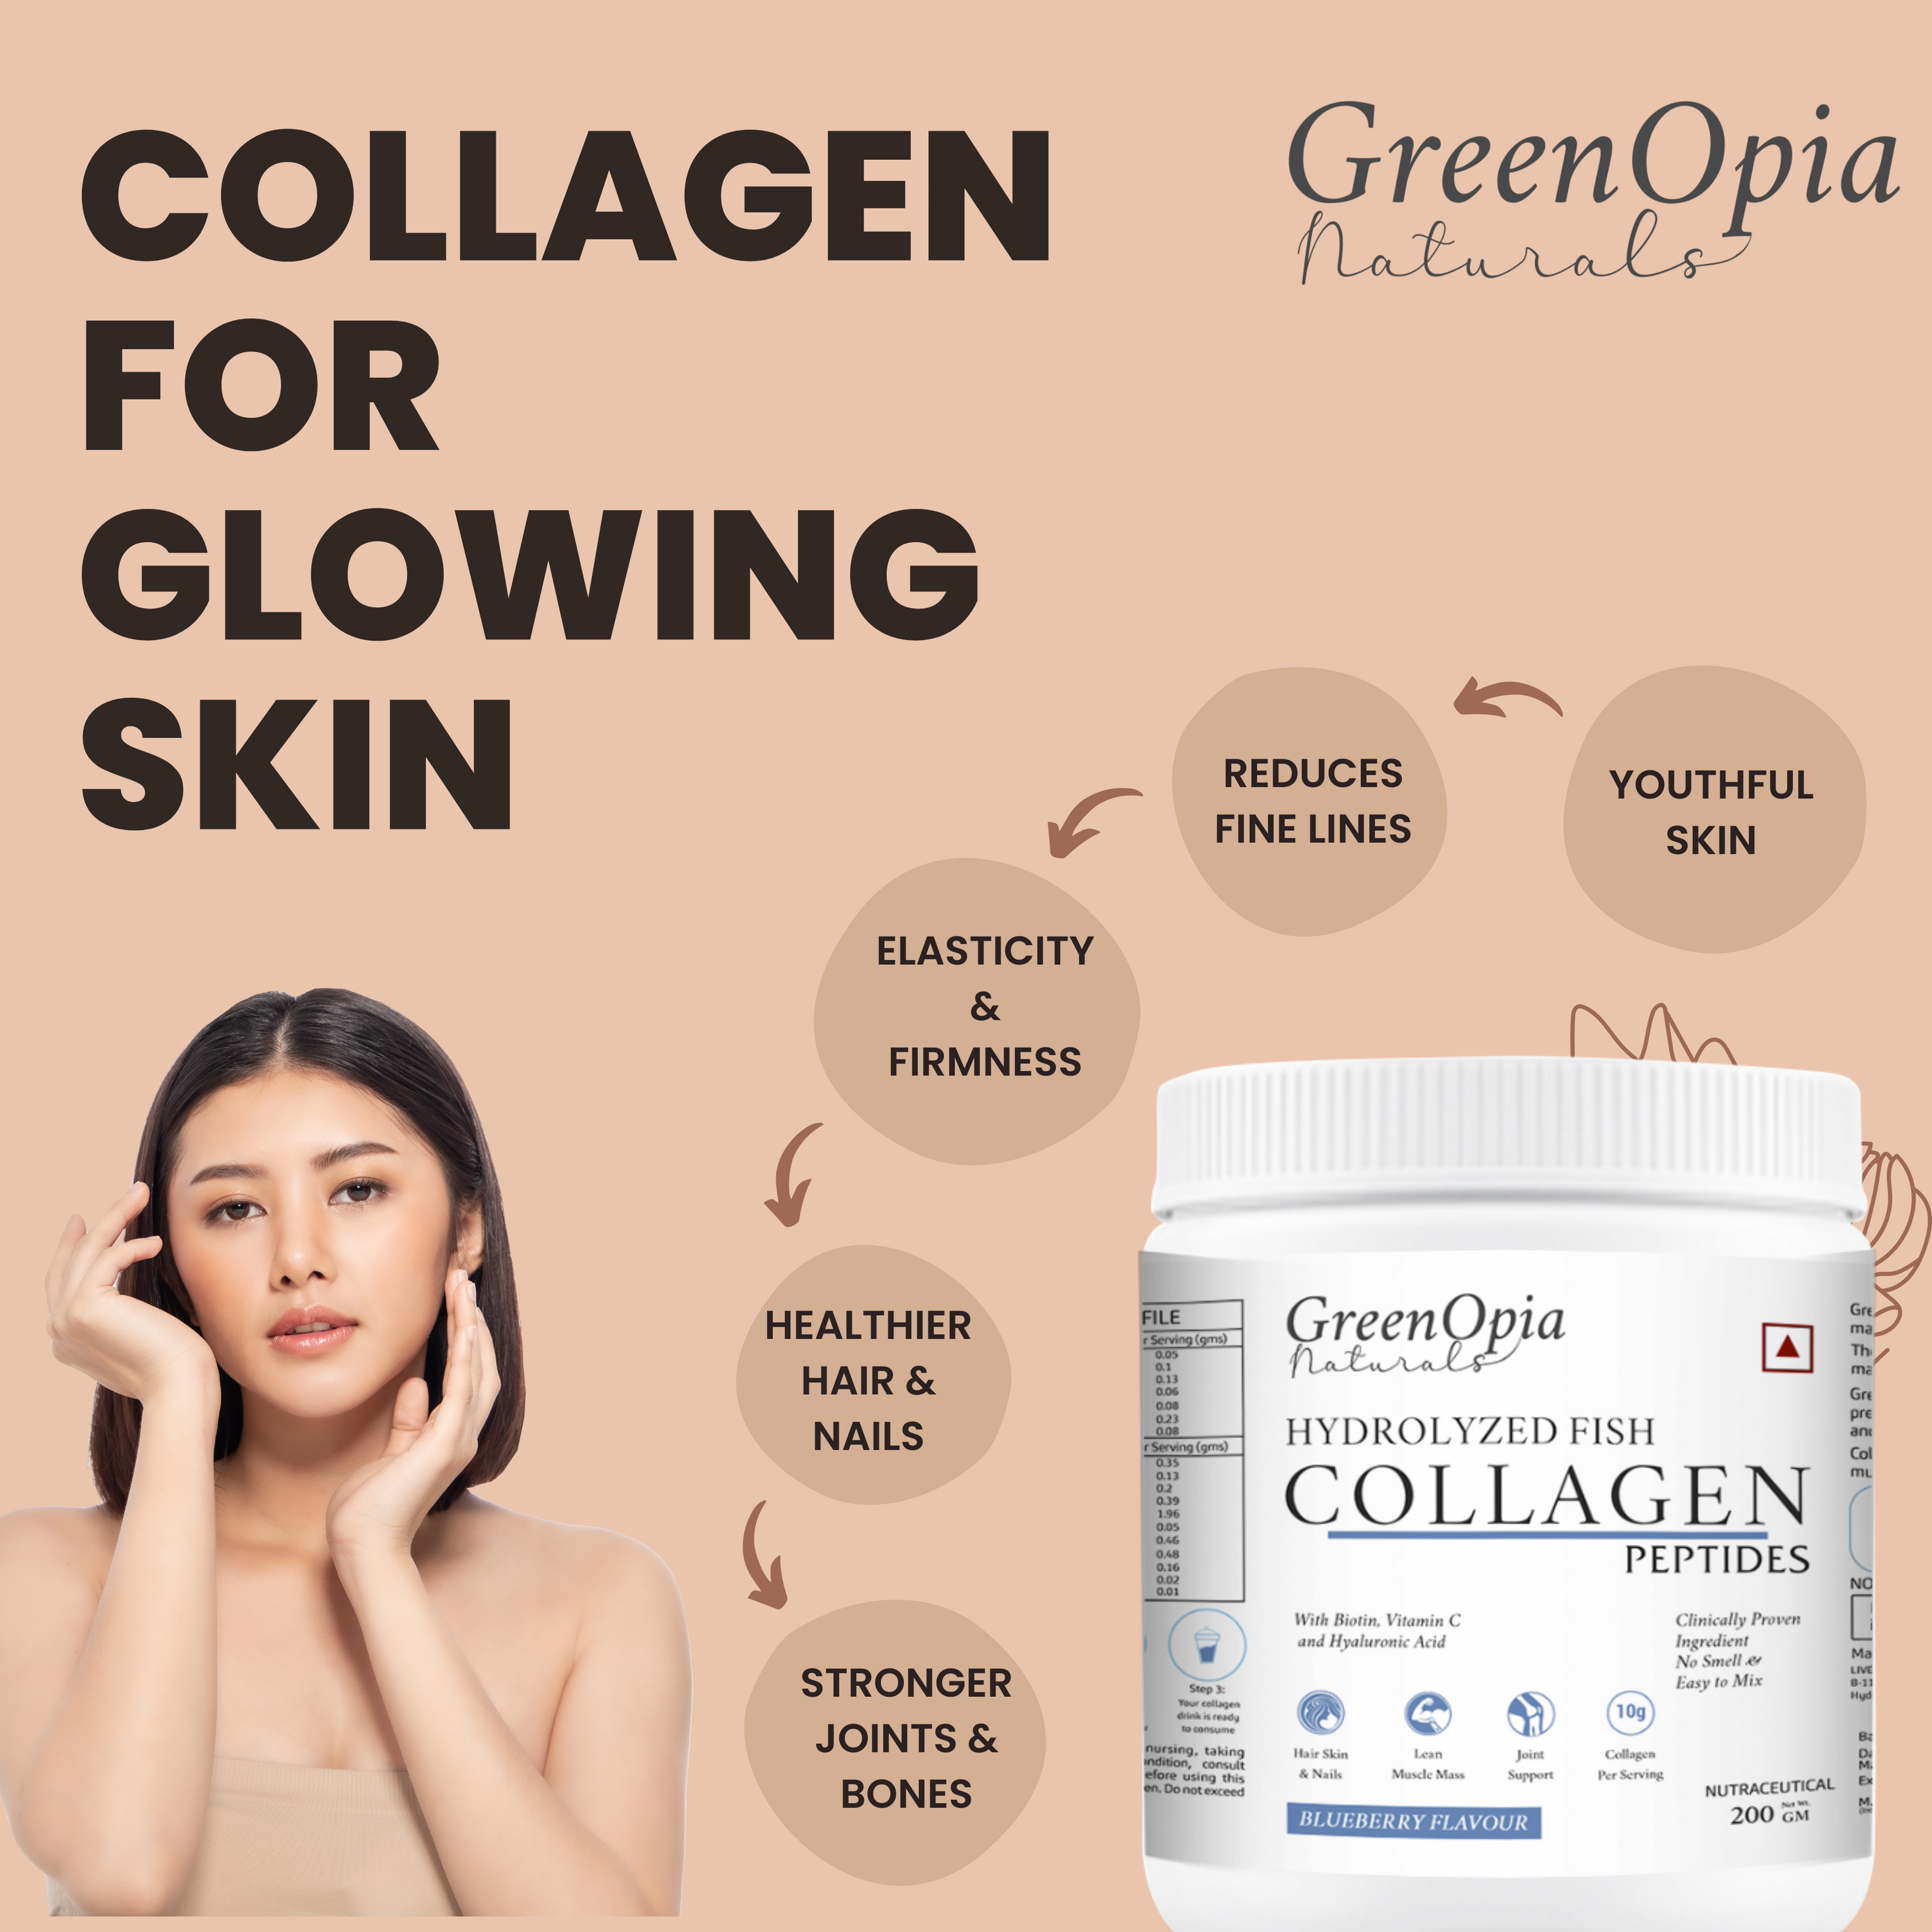 The Science Behind Collagen: The Key to Youthful Glow